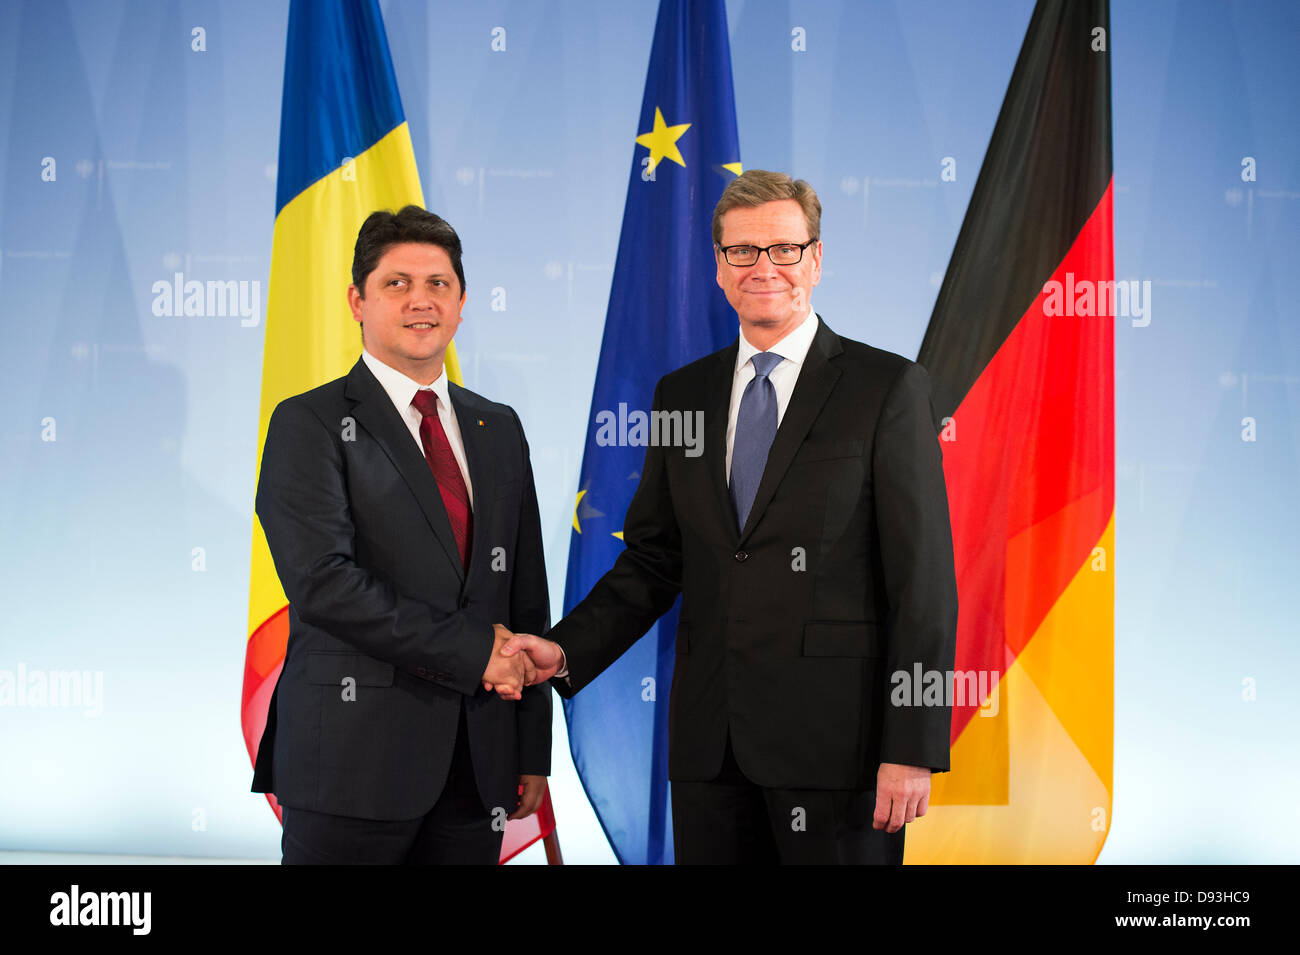 Berlin, Germany. June 10th 2013. Foreign Minister Westerwelle welcomes his Romanian counterpart Titus Corlatean for an interview at the Foreign Office. Mr. Corlatean visit the Foreign Office will be part of the journey of the Romanian Prime Minister Victor Ponta to Berlin. The focus of the conversation, the two foreign ministers bilateral and European issues will be available. Credit: Credit: Gonçalo Silva/Alamy Live News. Stock Photo